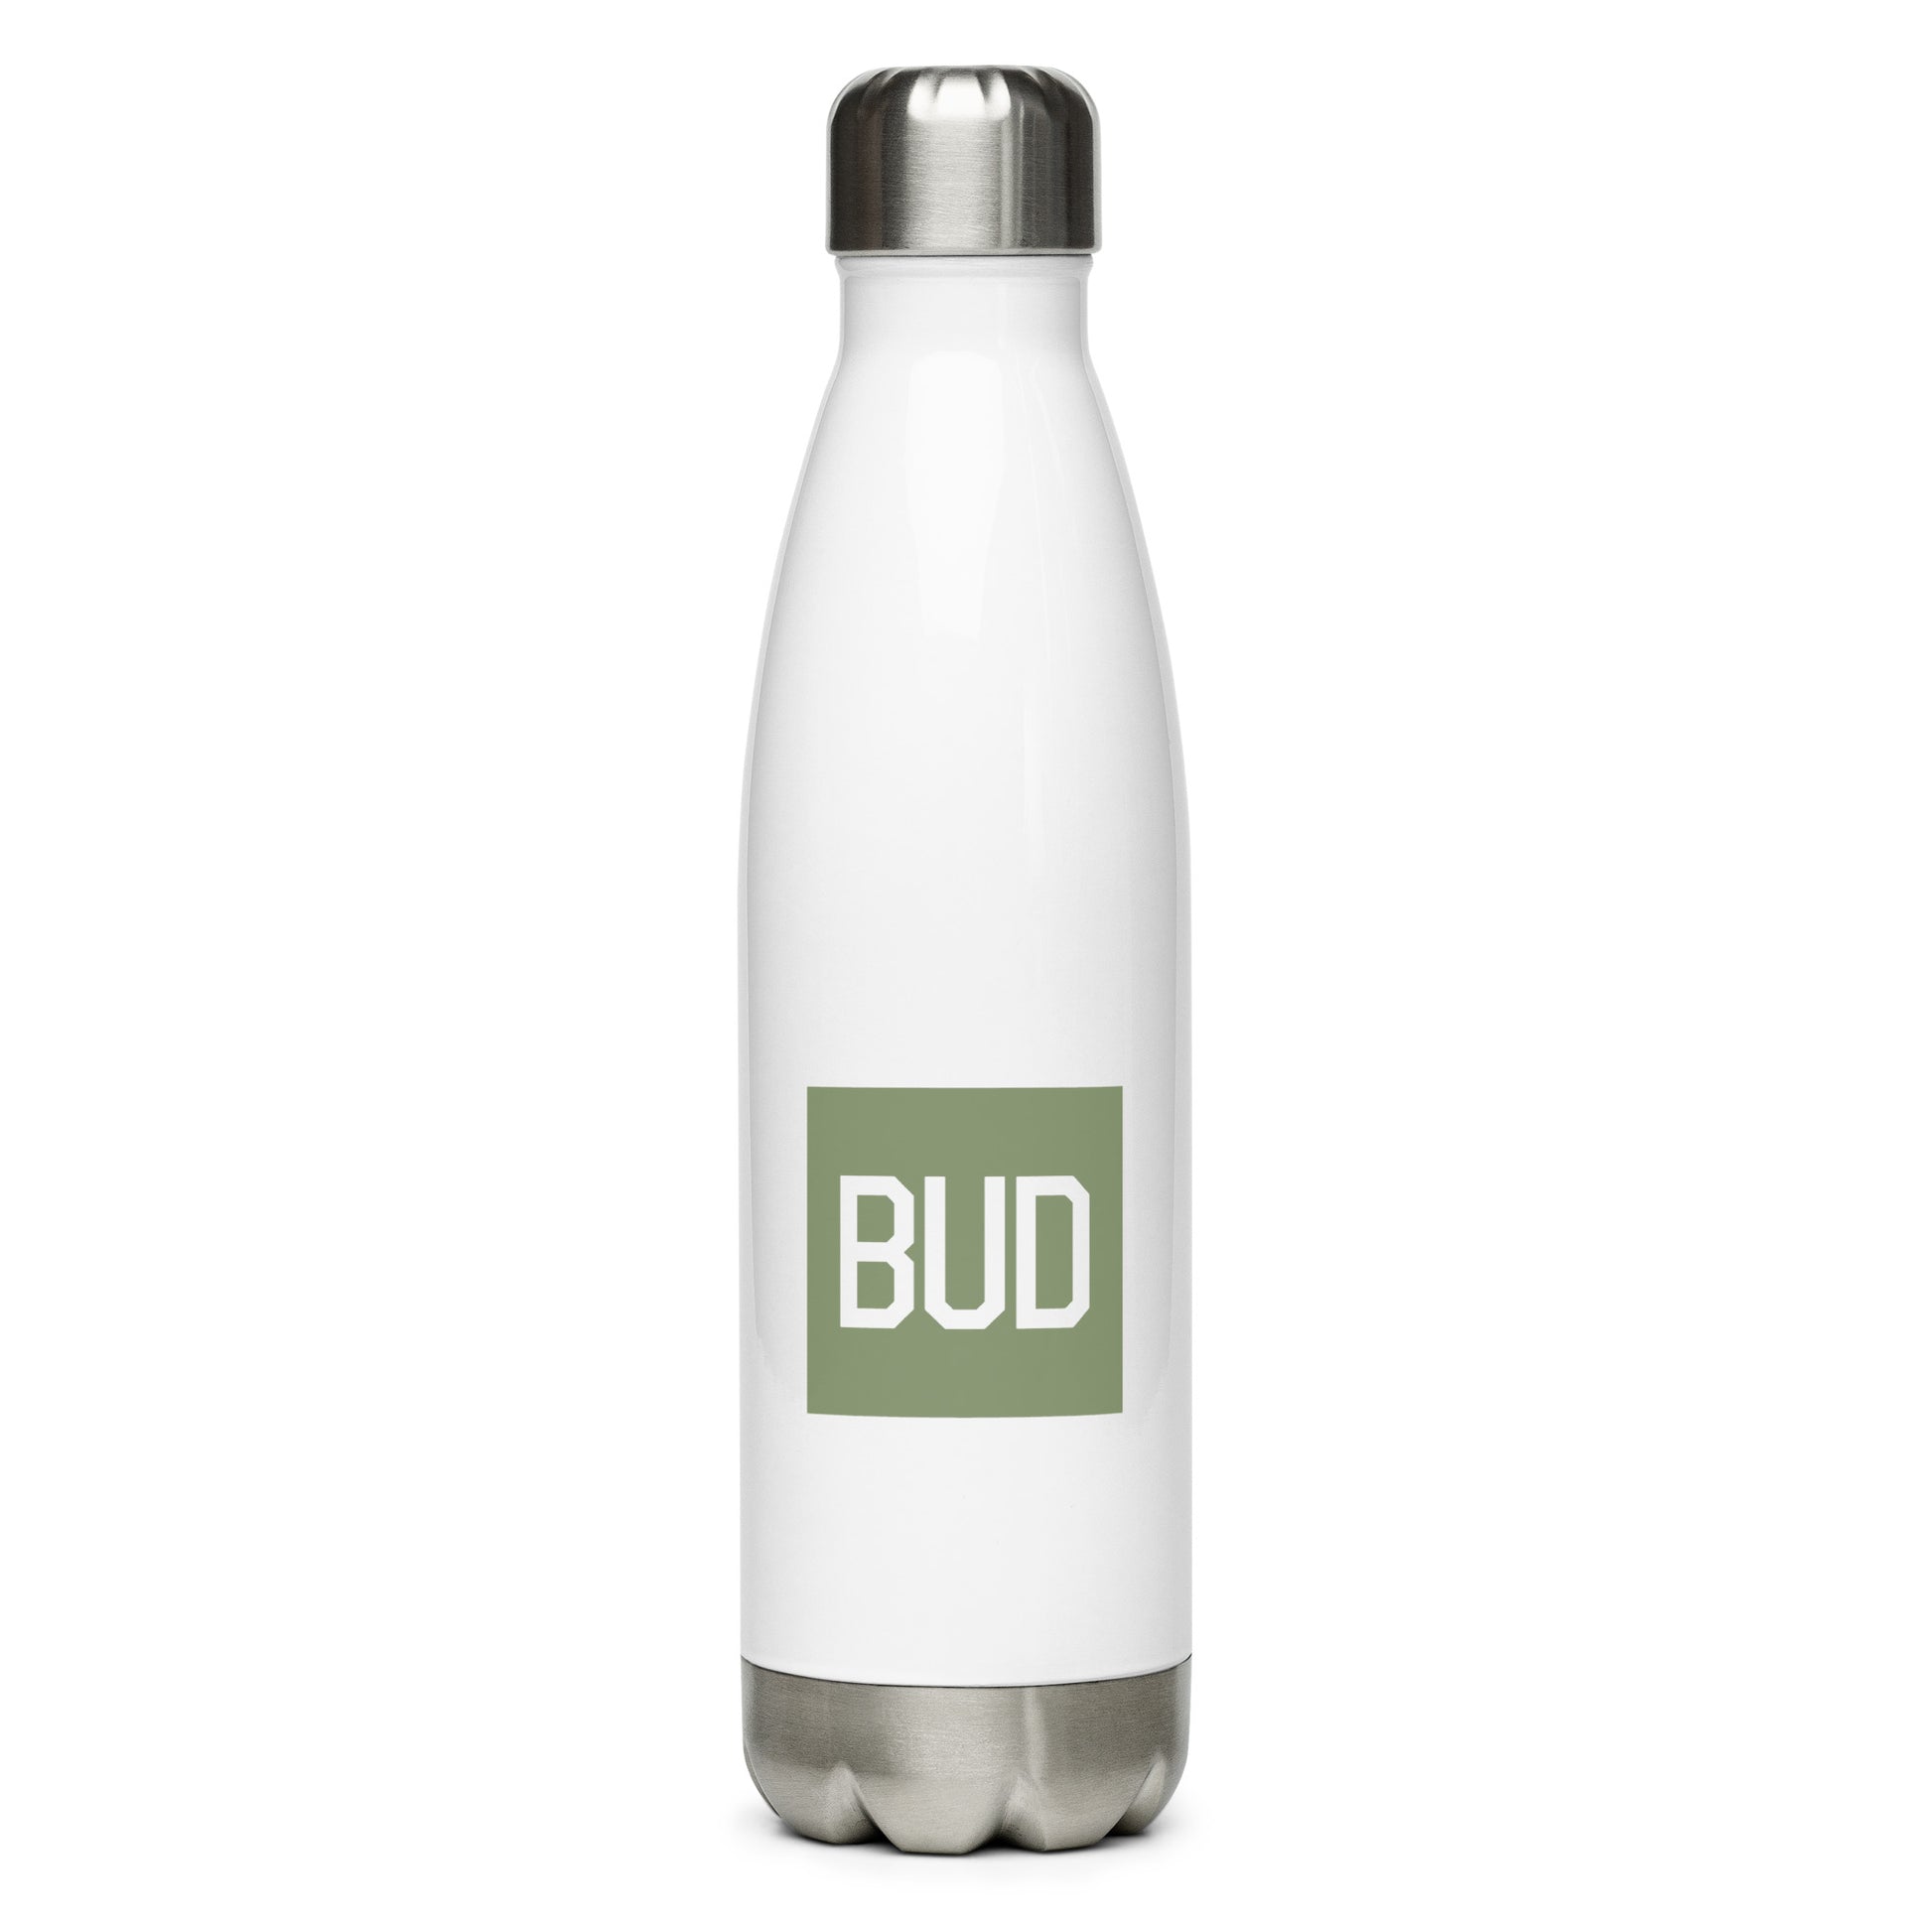 Aviation Gift Water Bottle - Camo Green • BUD Budapest • YHM Designs - Image 01